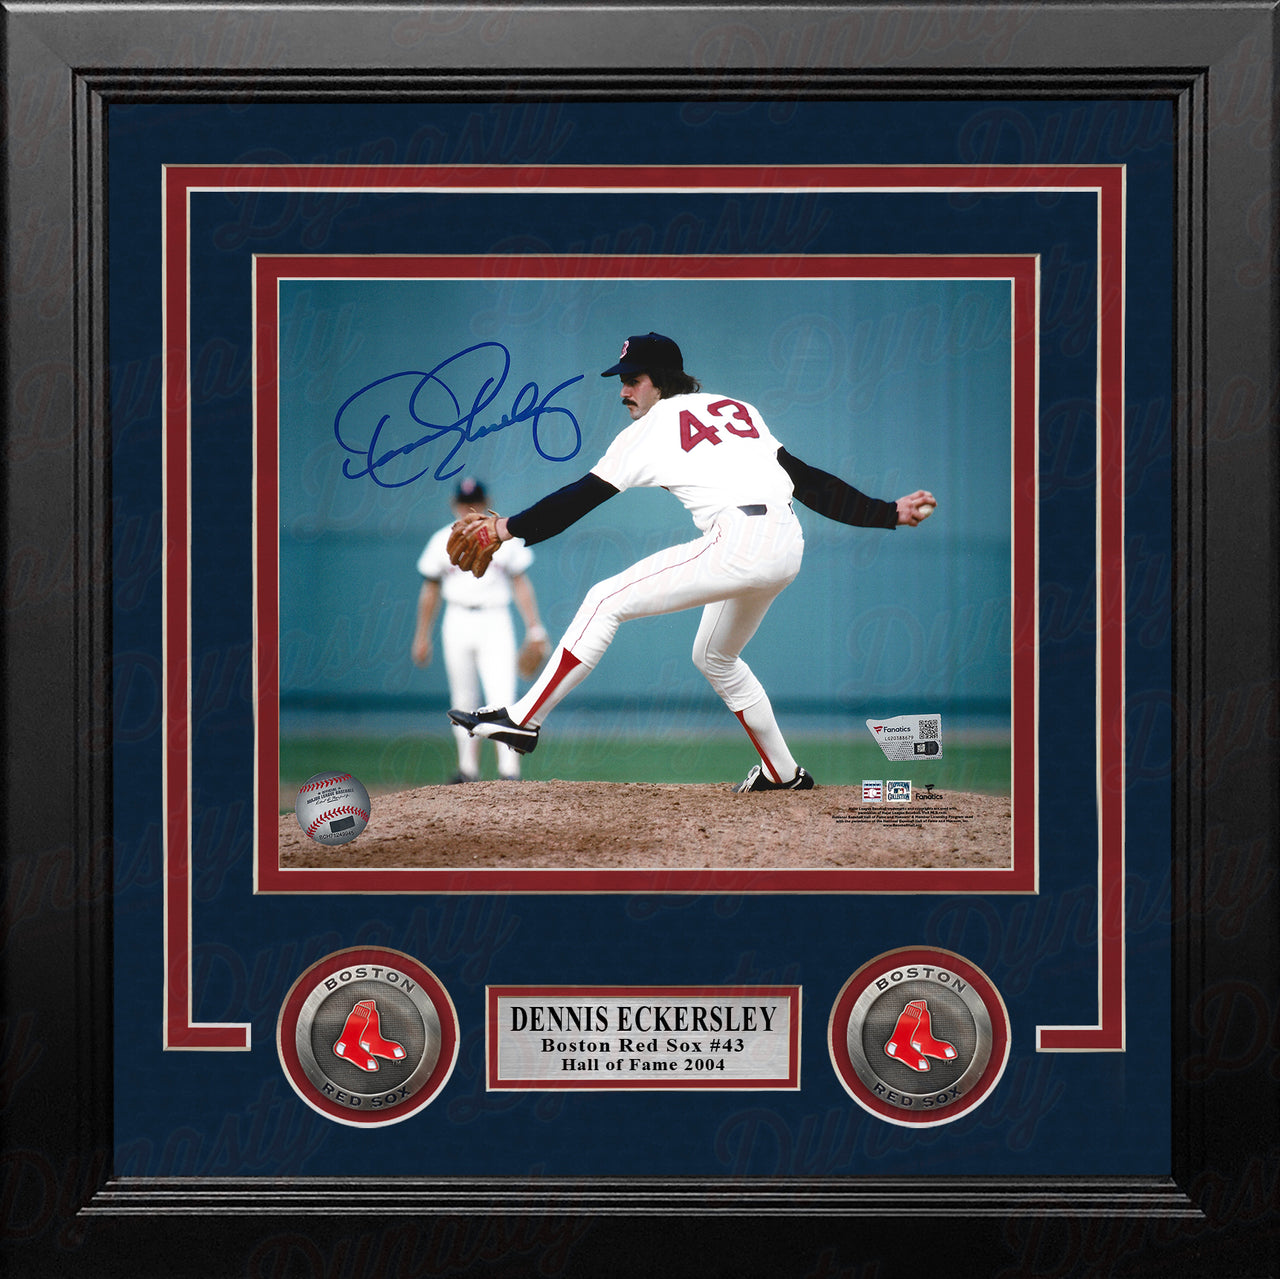 Dennis Eckersley in Action Boston Red Sox Autographed 8" x 10" Framed Baseball Photo - Dynasty Sports & Framing 